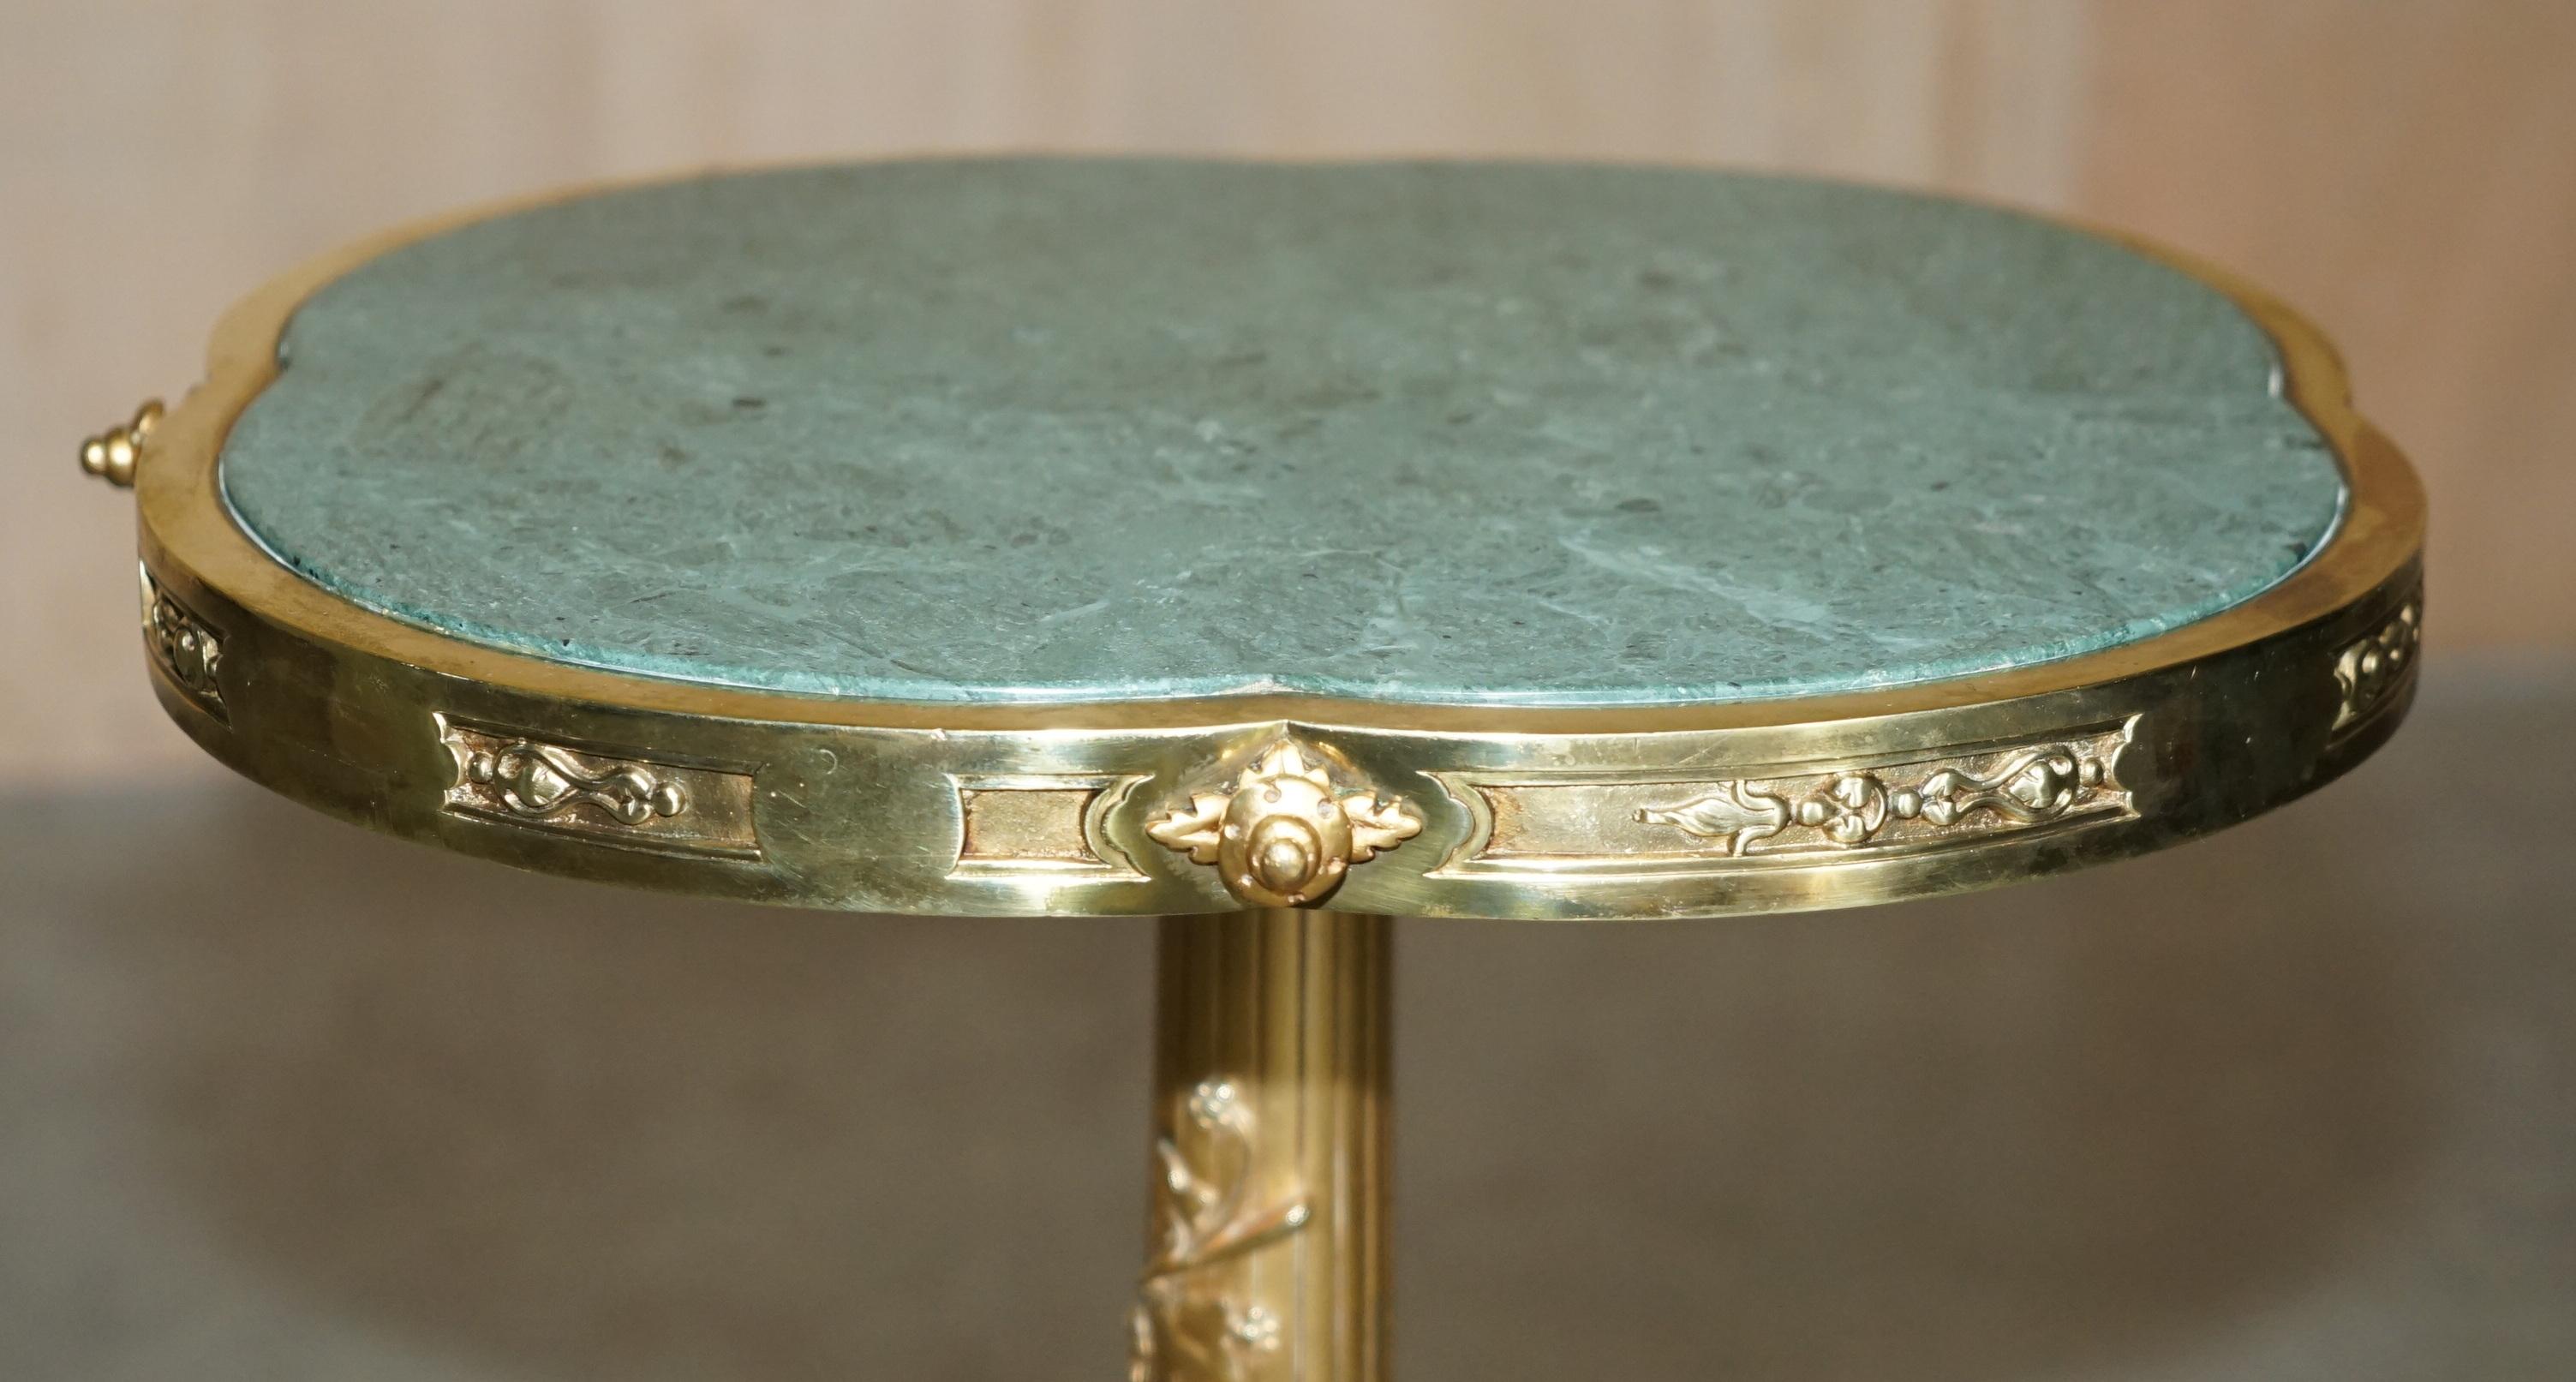 EXQUISITE ANTIQUE CIRCA 1900 BRASS SiDE END LAMP TABLE WITH THICK MARBLE TOP For Sale 9